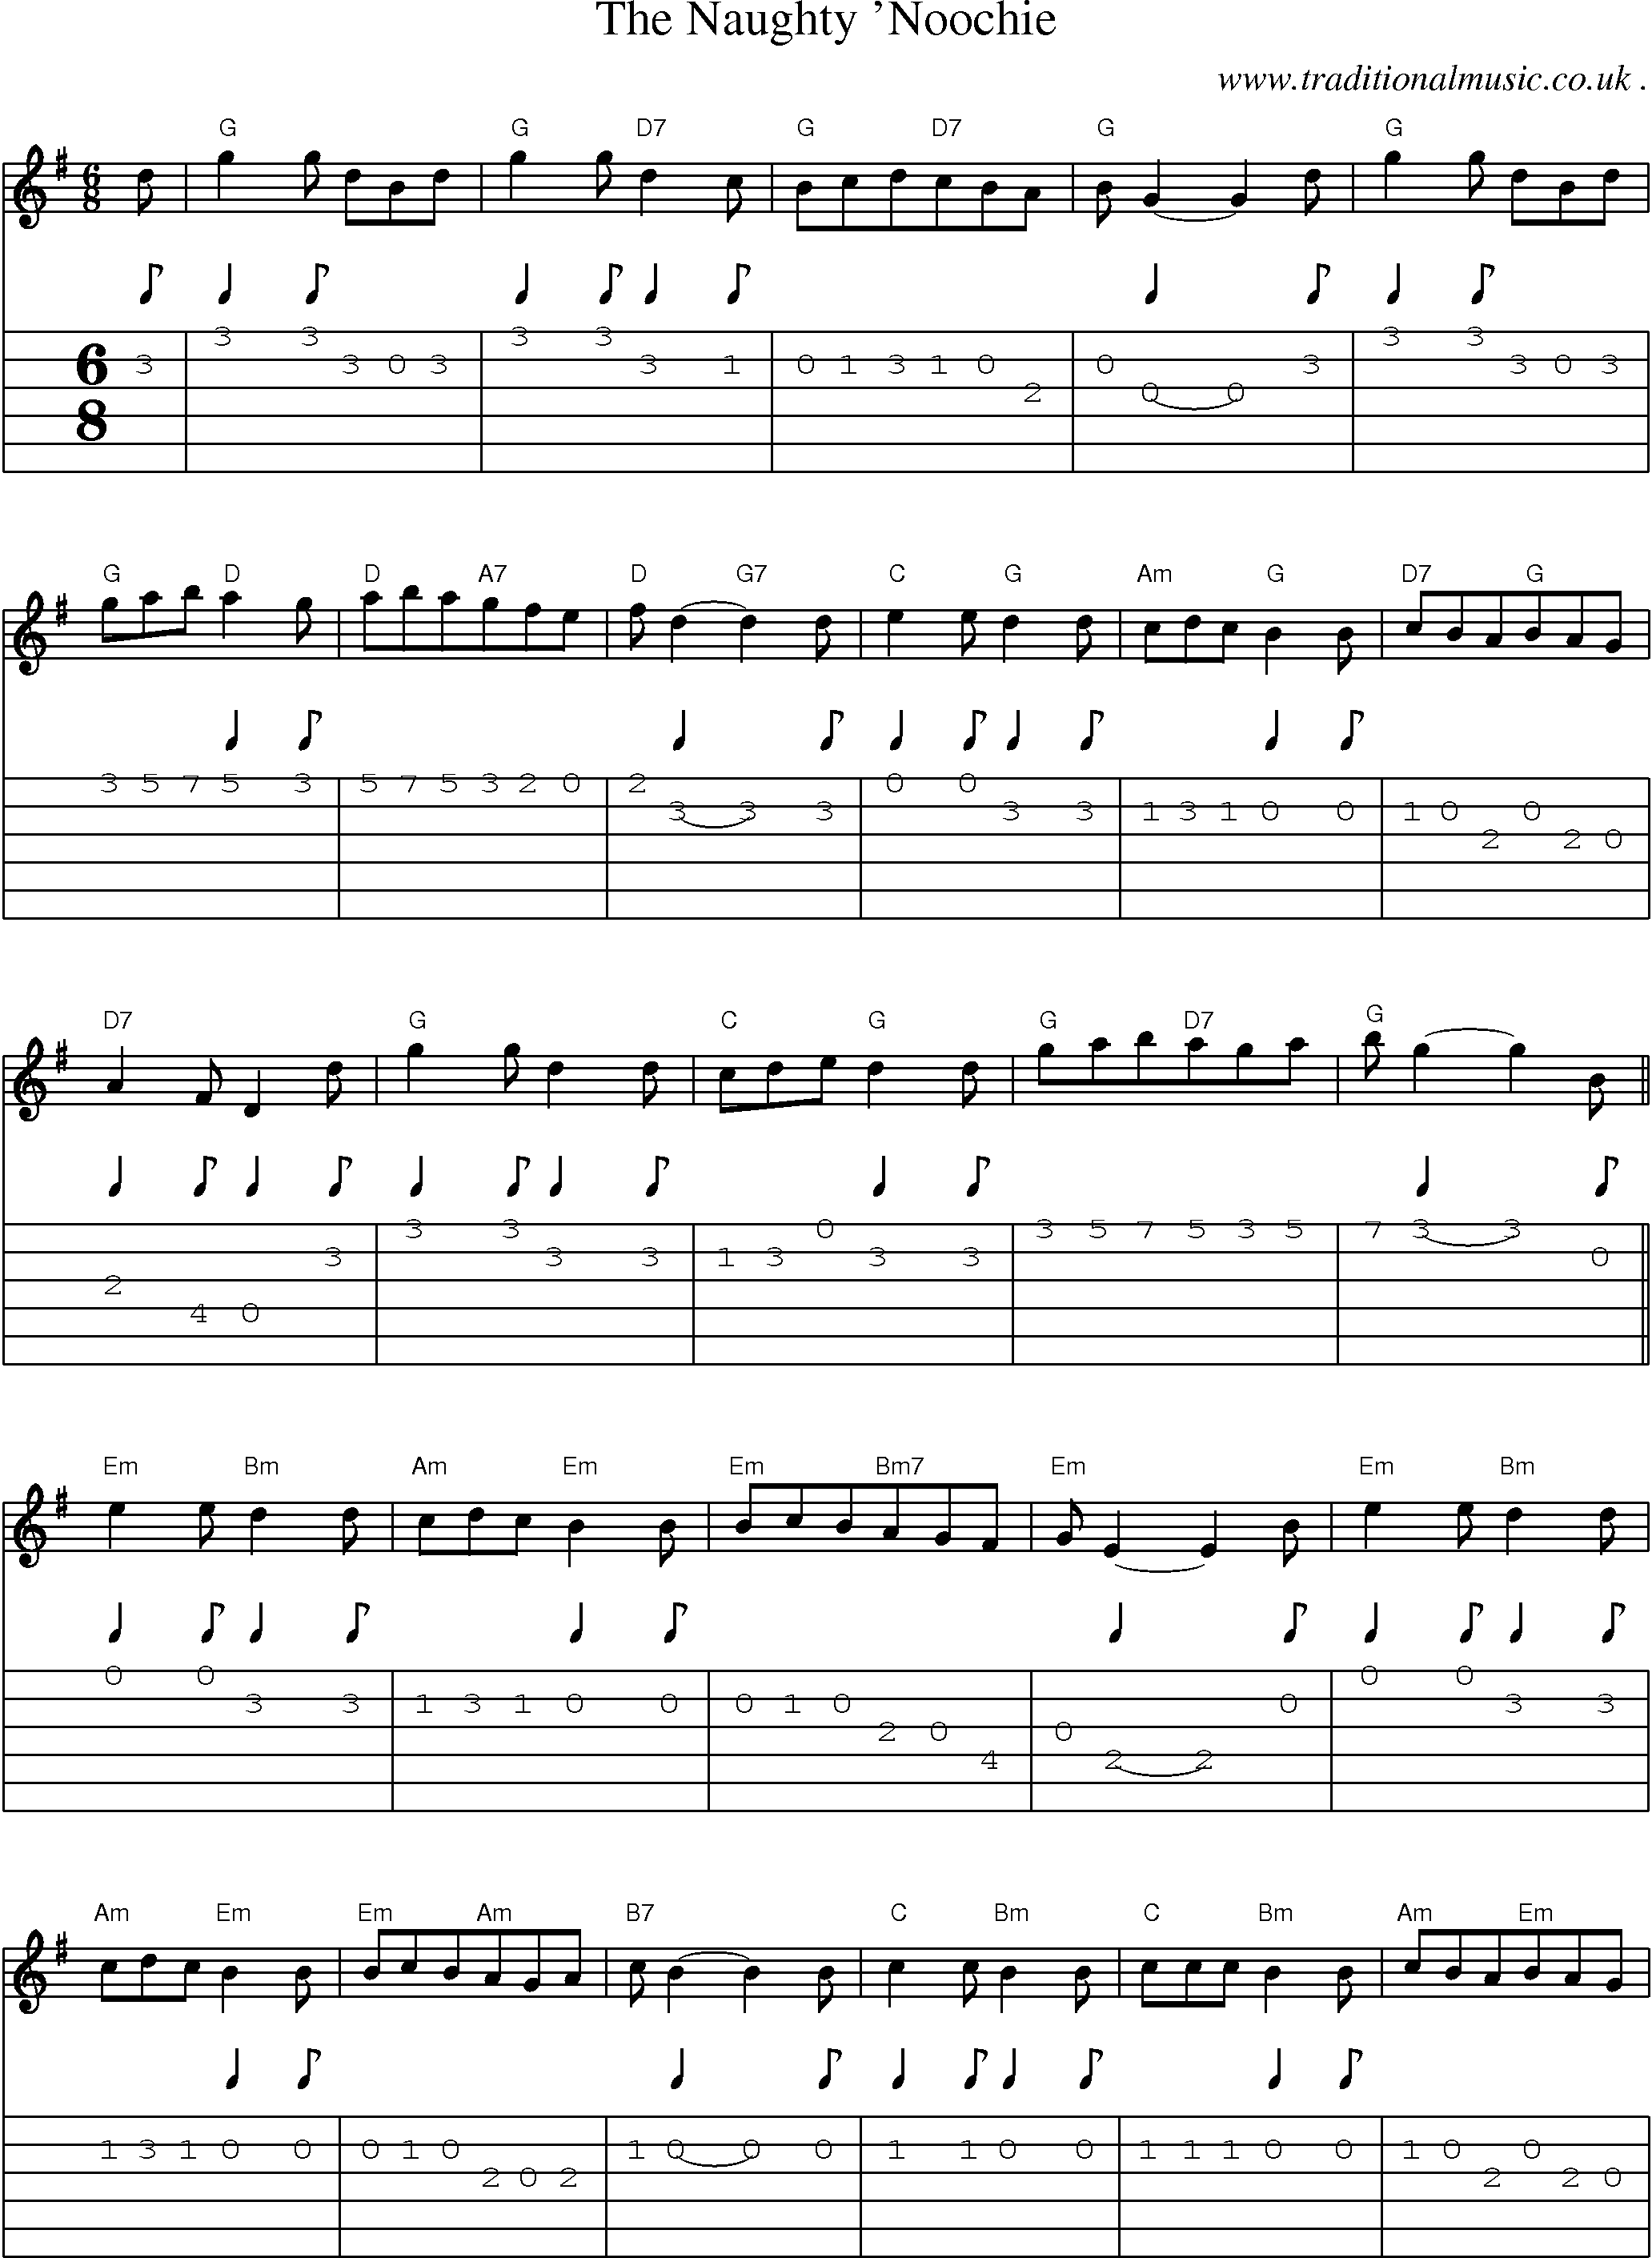 Sheet-Music and Guitar Tabs for The Naughty Noochie